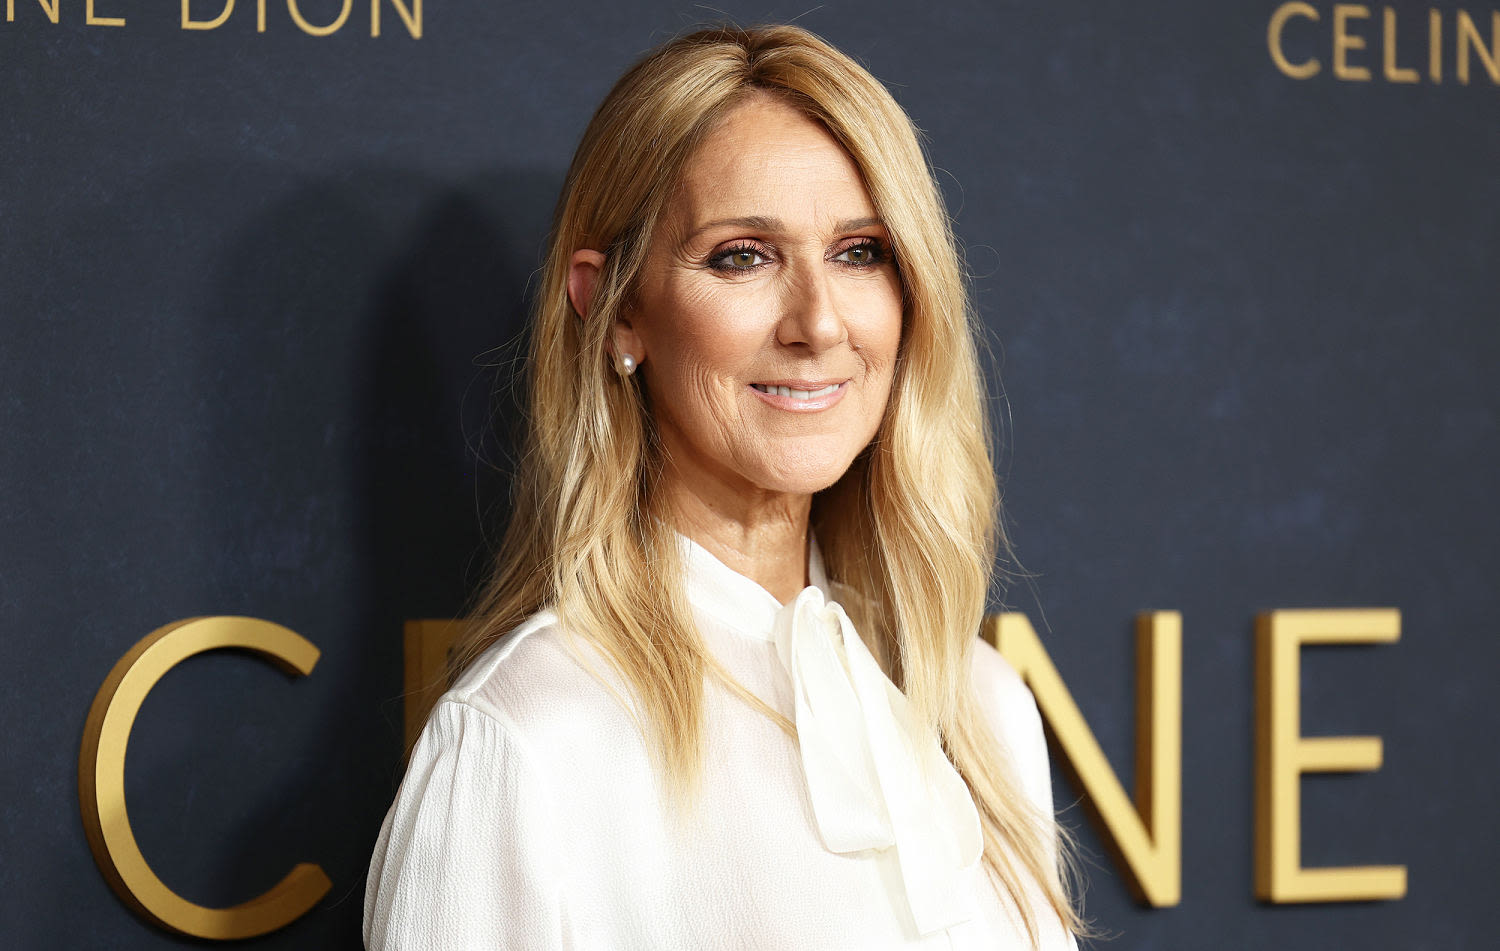 Celine Dion is 'happy to be back in Paris' amid Olympic speculation, shares new photos